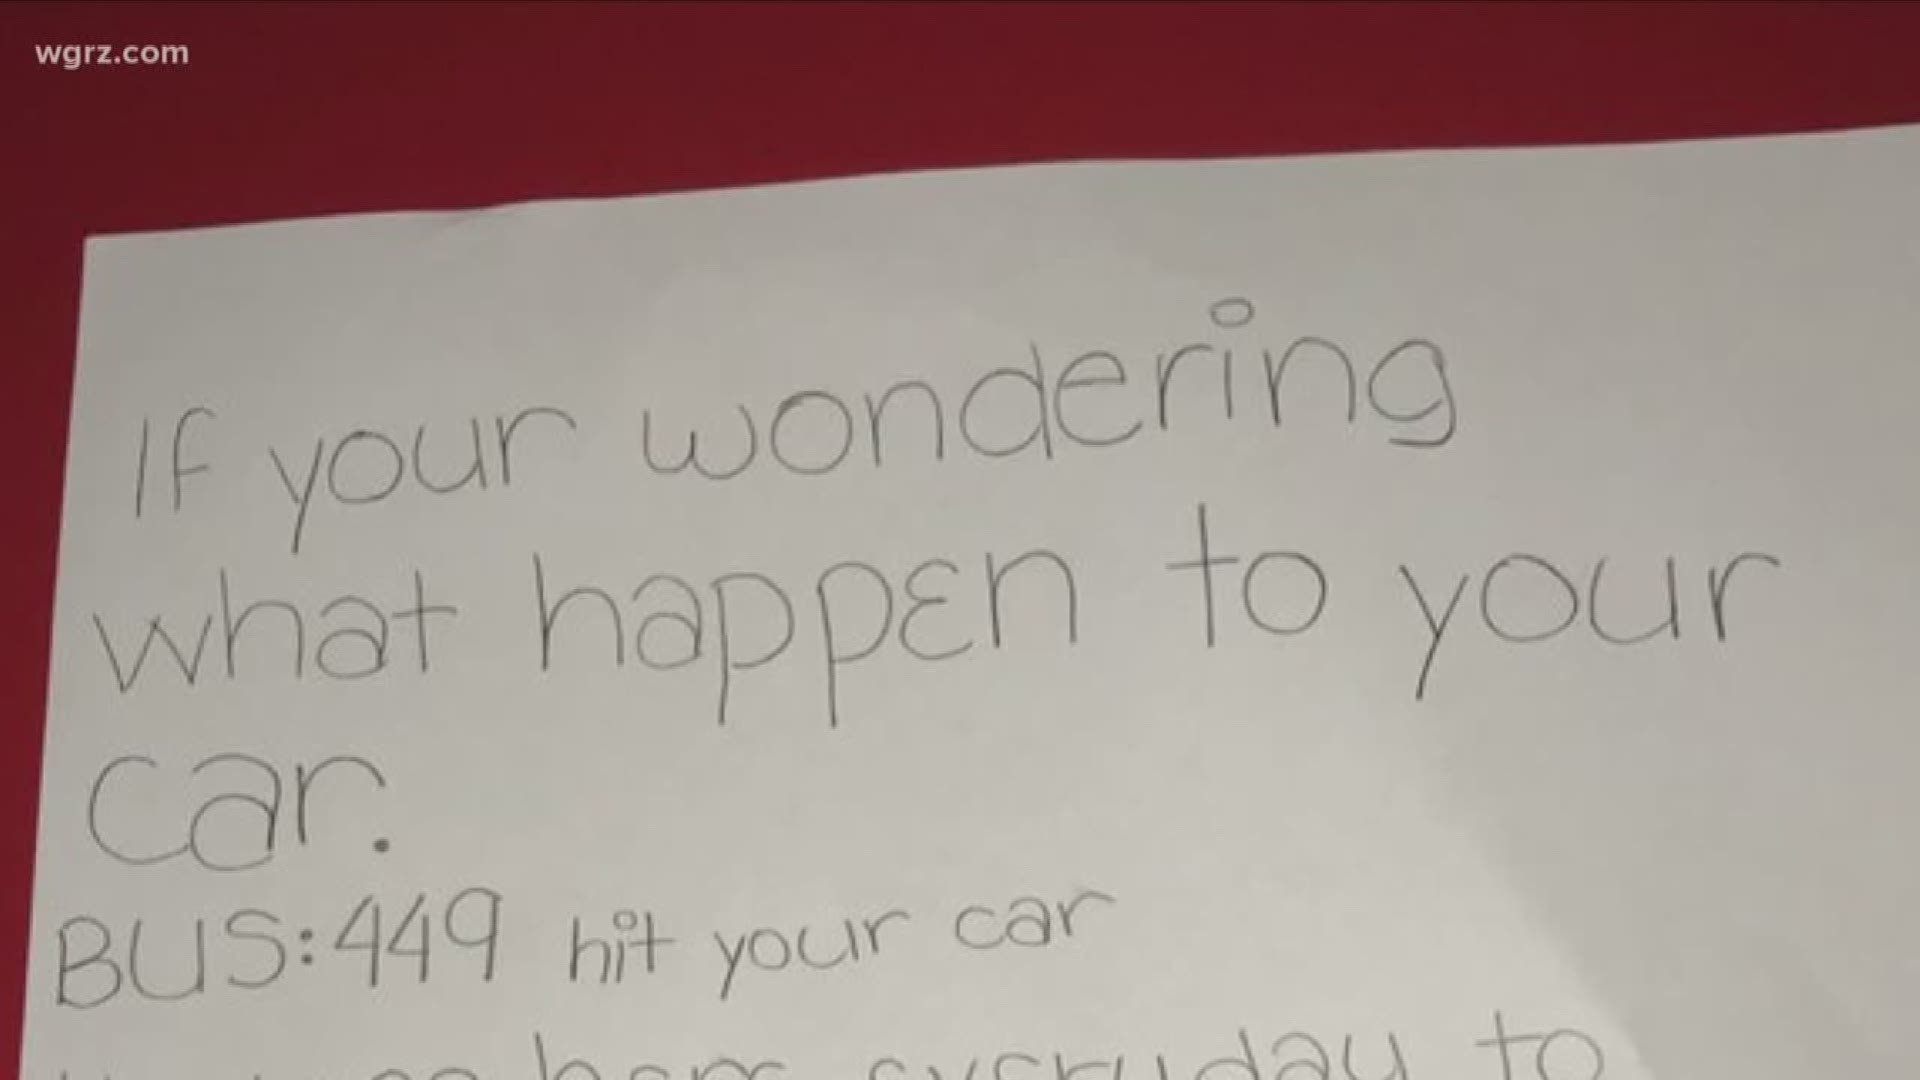 6th Grader Leaves Note To Help Solve Accident